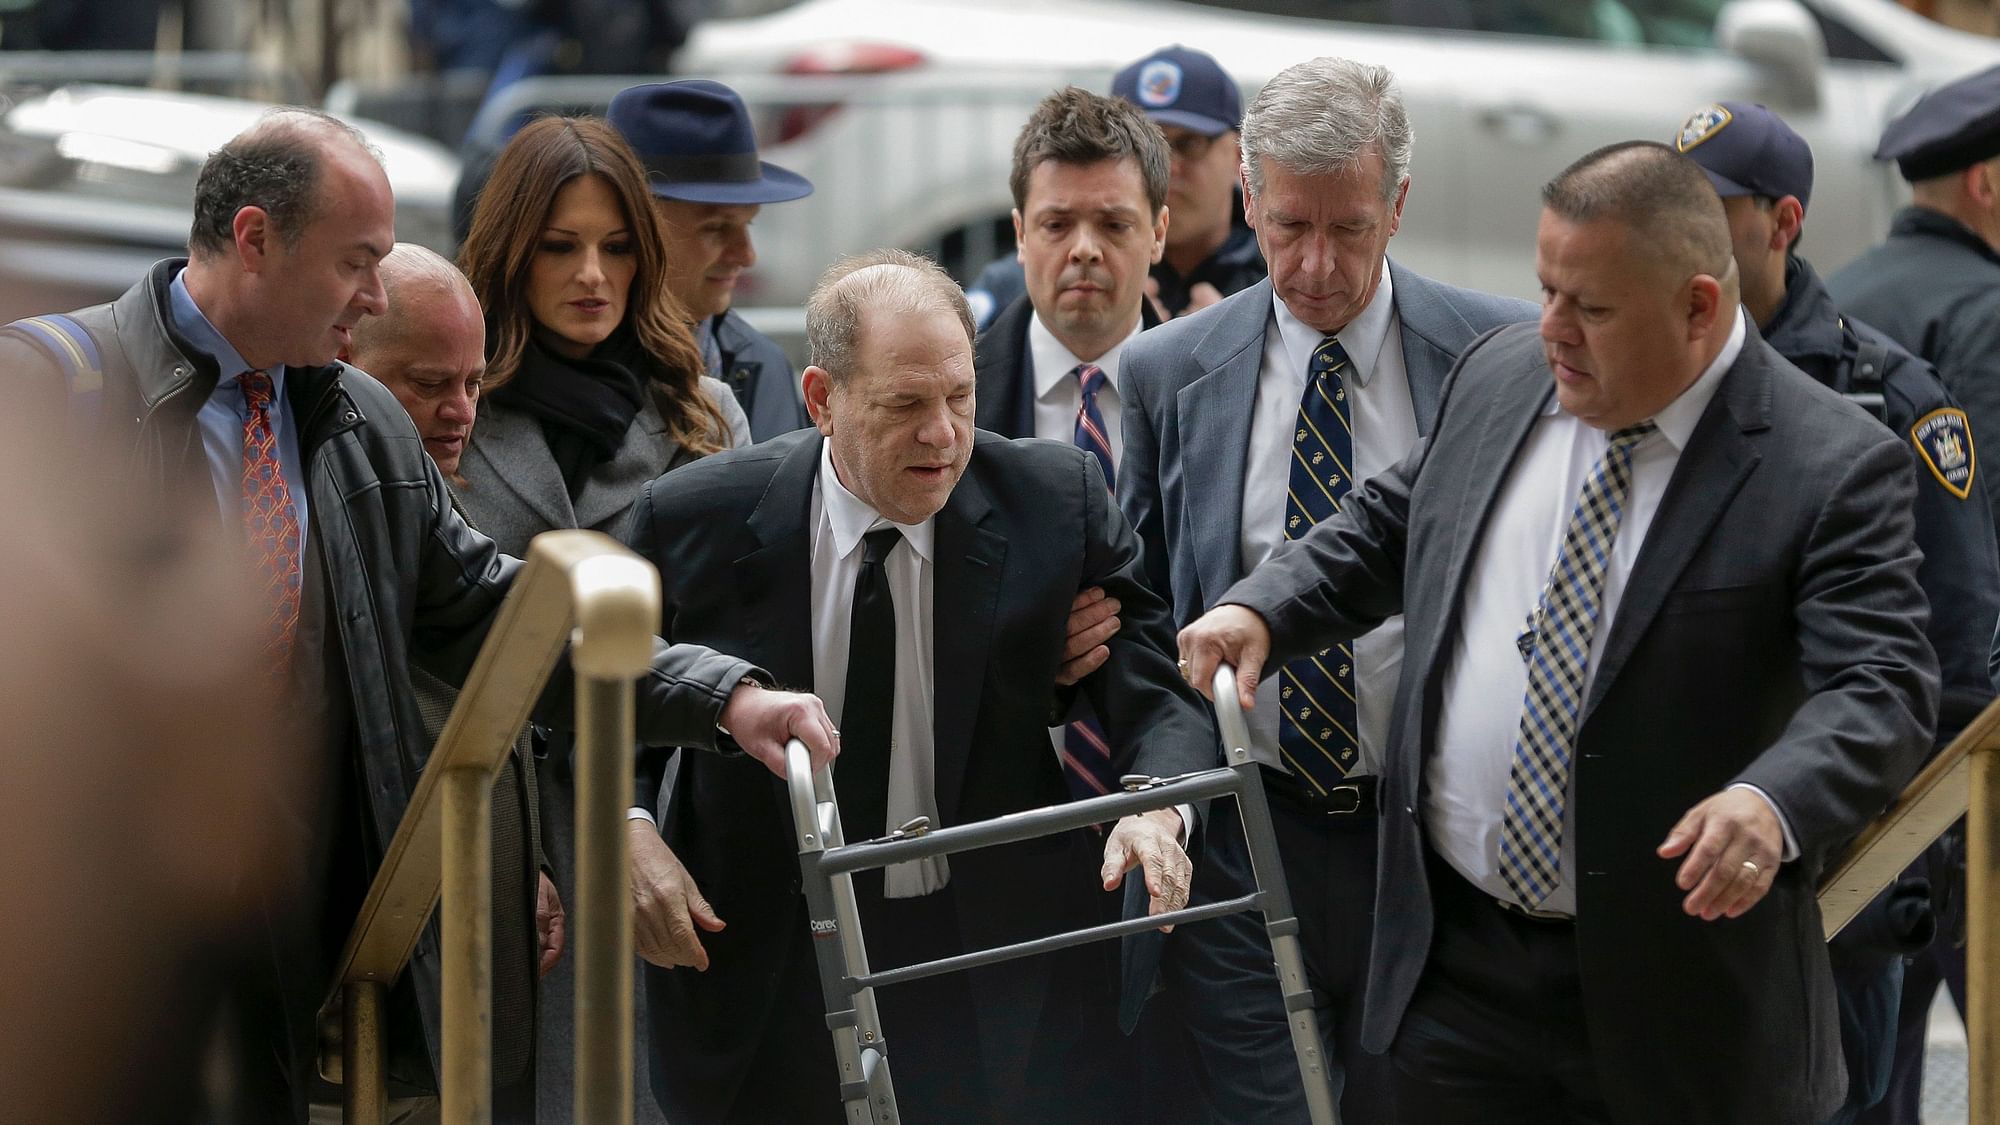 Harvey Weinstein surrounded by court officers as he leaves court following a pre trial hearing.